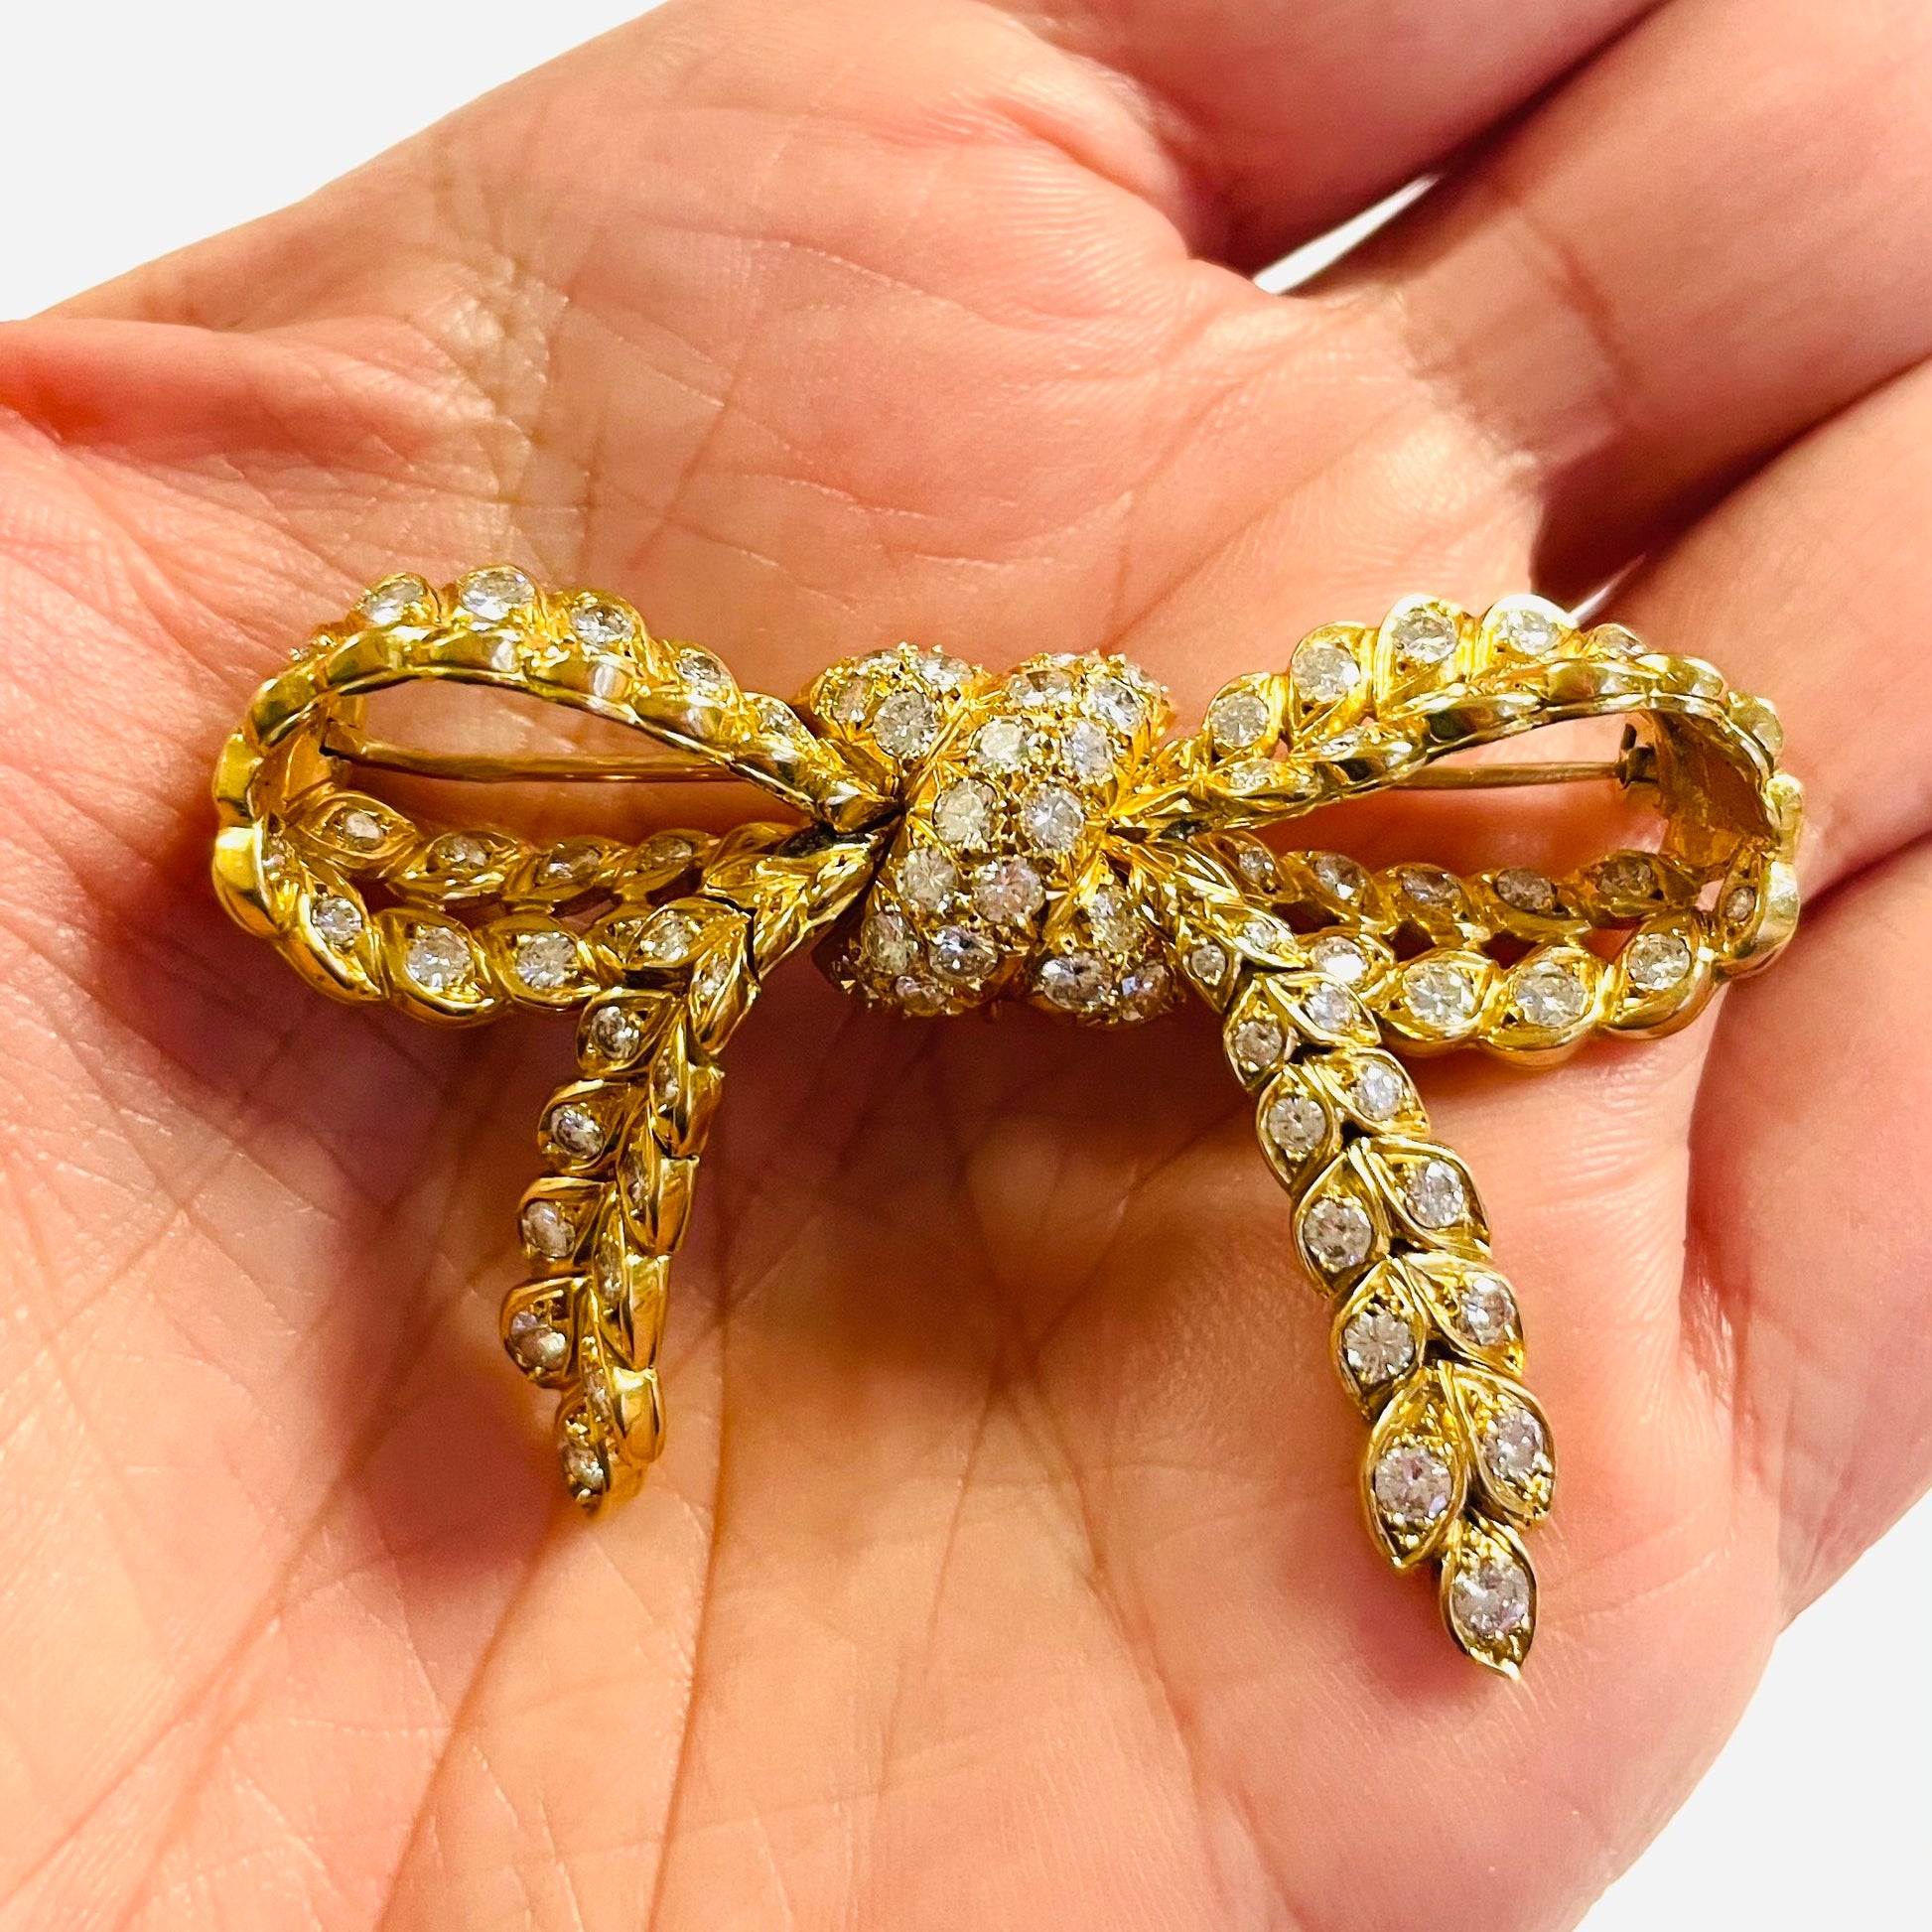 Pierre Sterlé Paris 1940s 18KT Yellow Gold Diamond Bow Brooch in hand